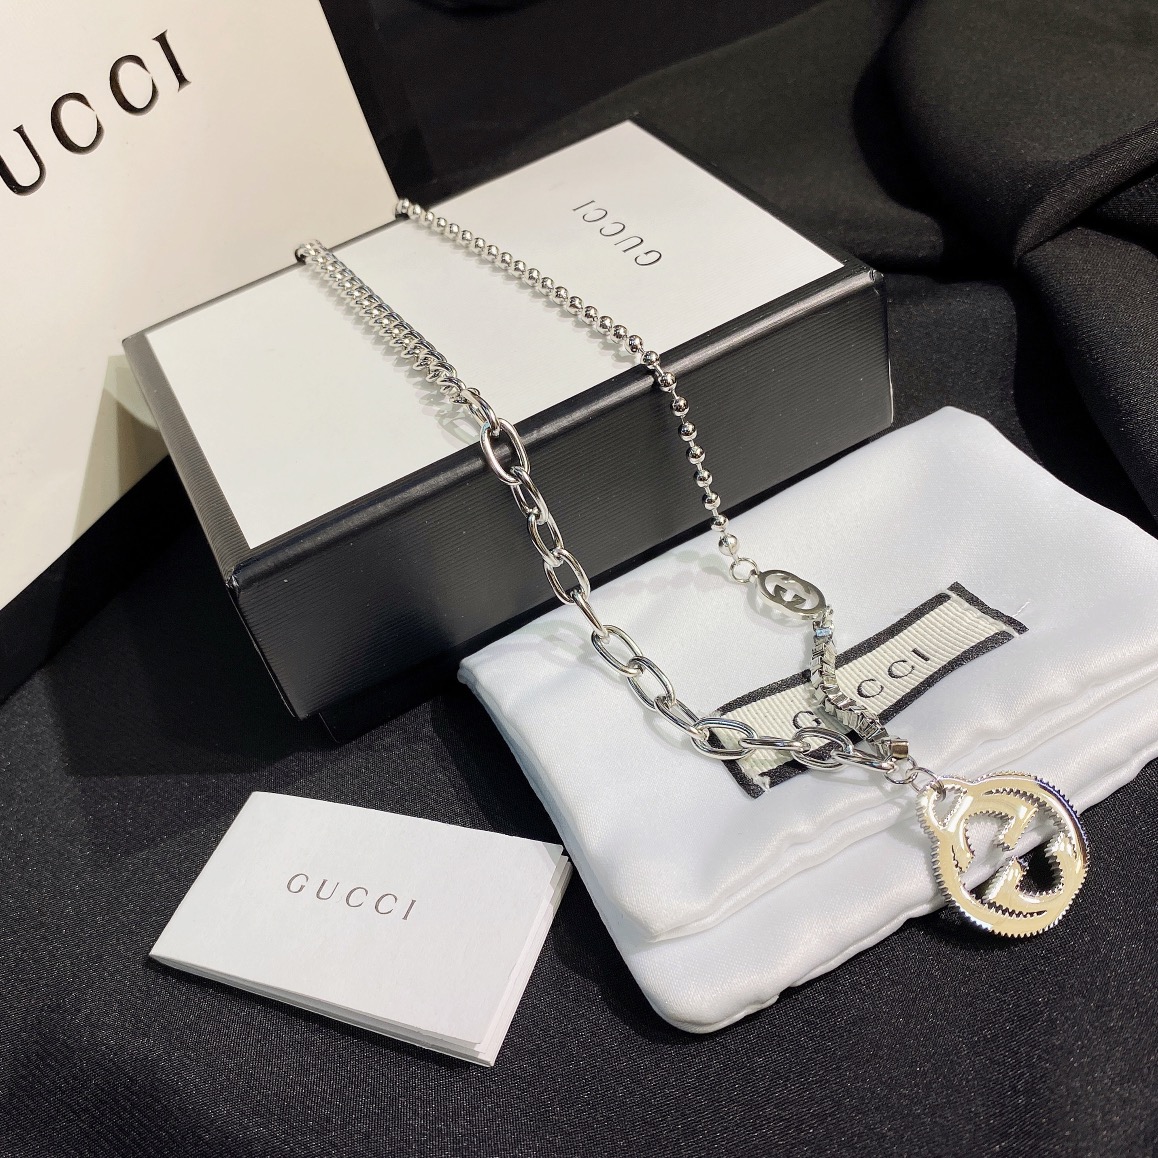 X369  Gucci necklace 106804